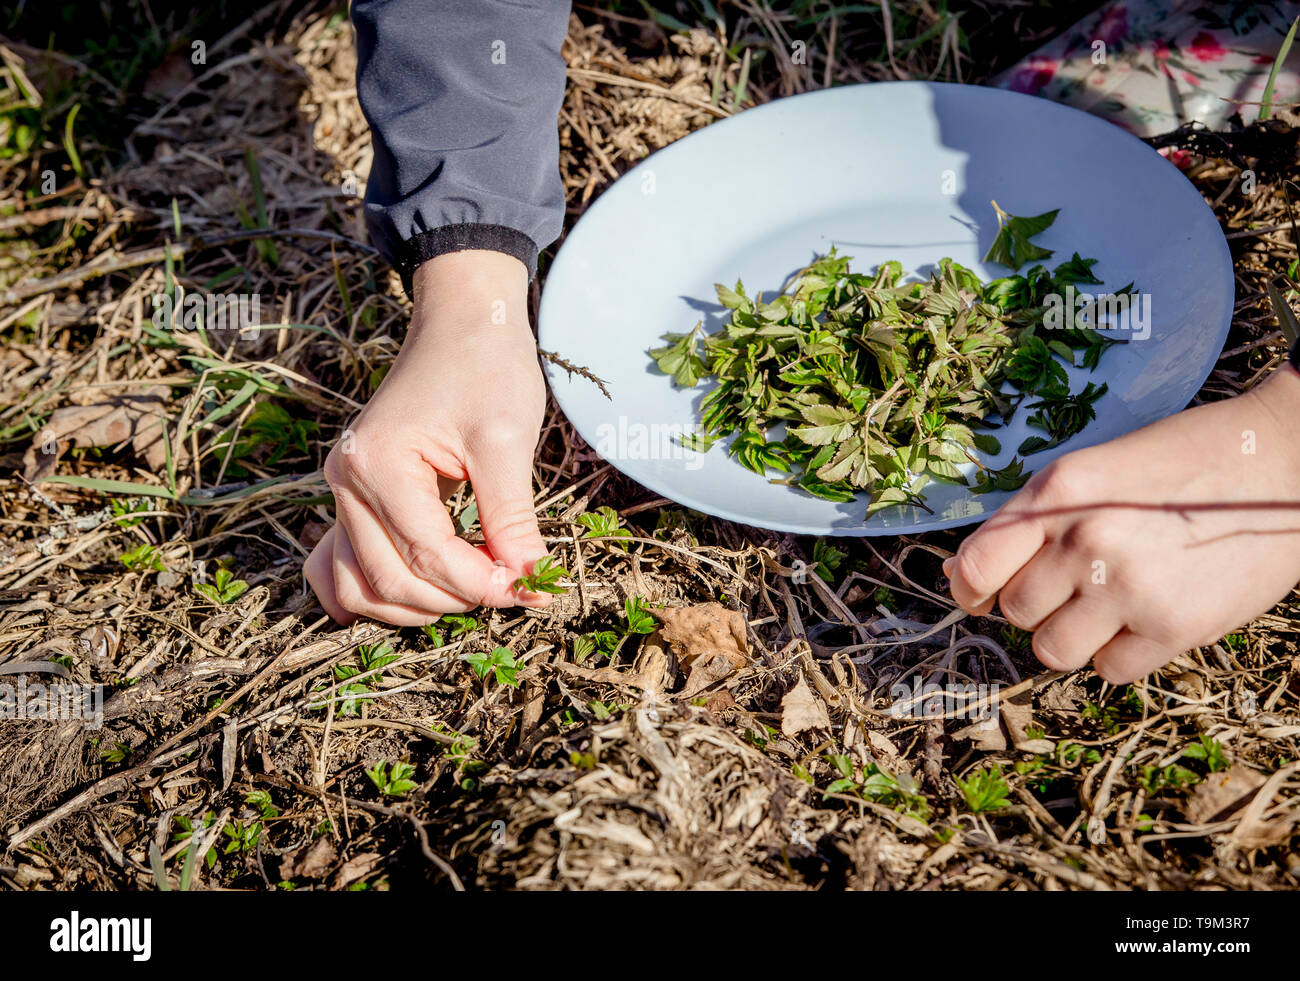 Person picking fresh young goutweed leaves for food in nature in spring, Northern Europe. Aegopodium podagraria commonly called ground elder. Stock Photo